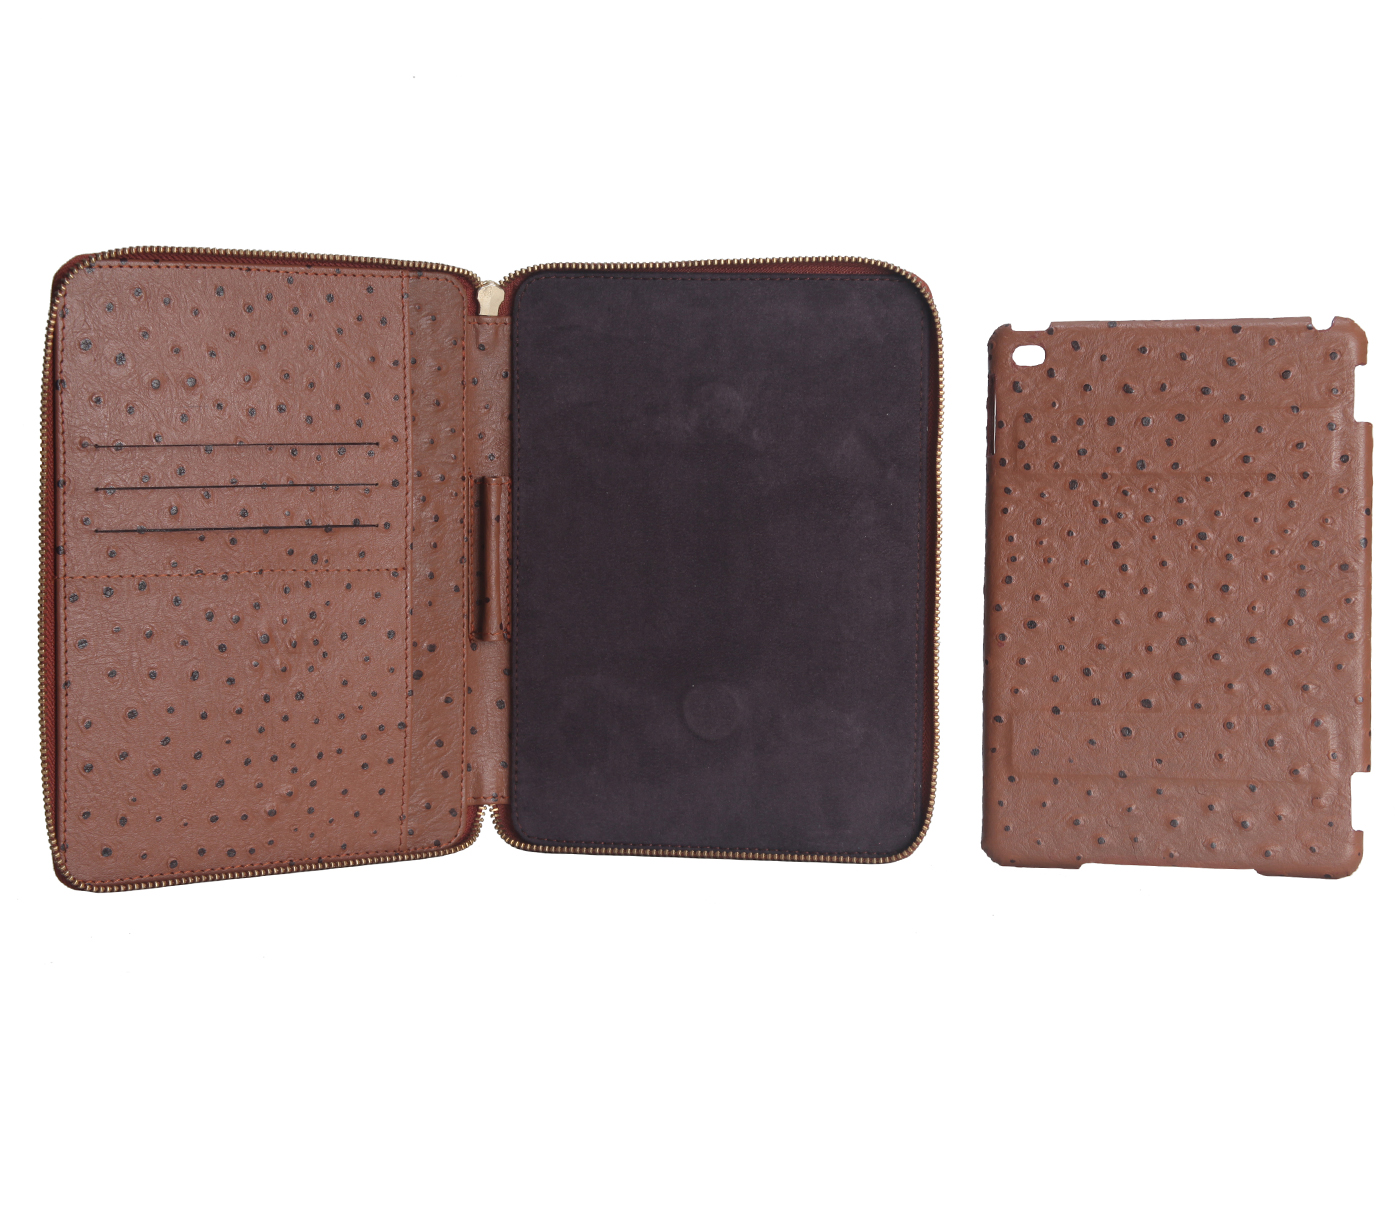 W281--Ipad mini cover with magnetic tray in Genuine Leather - Tan